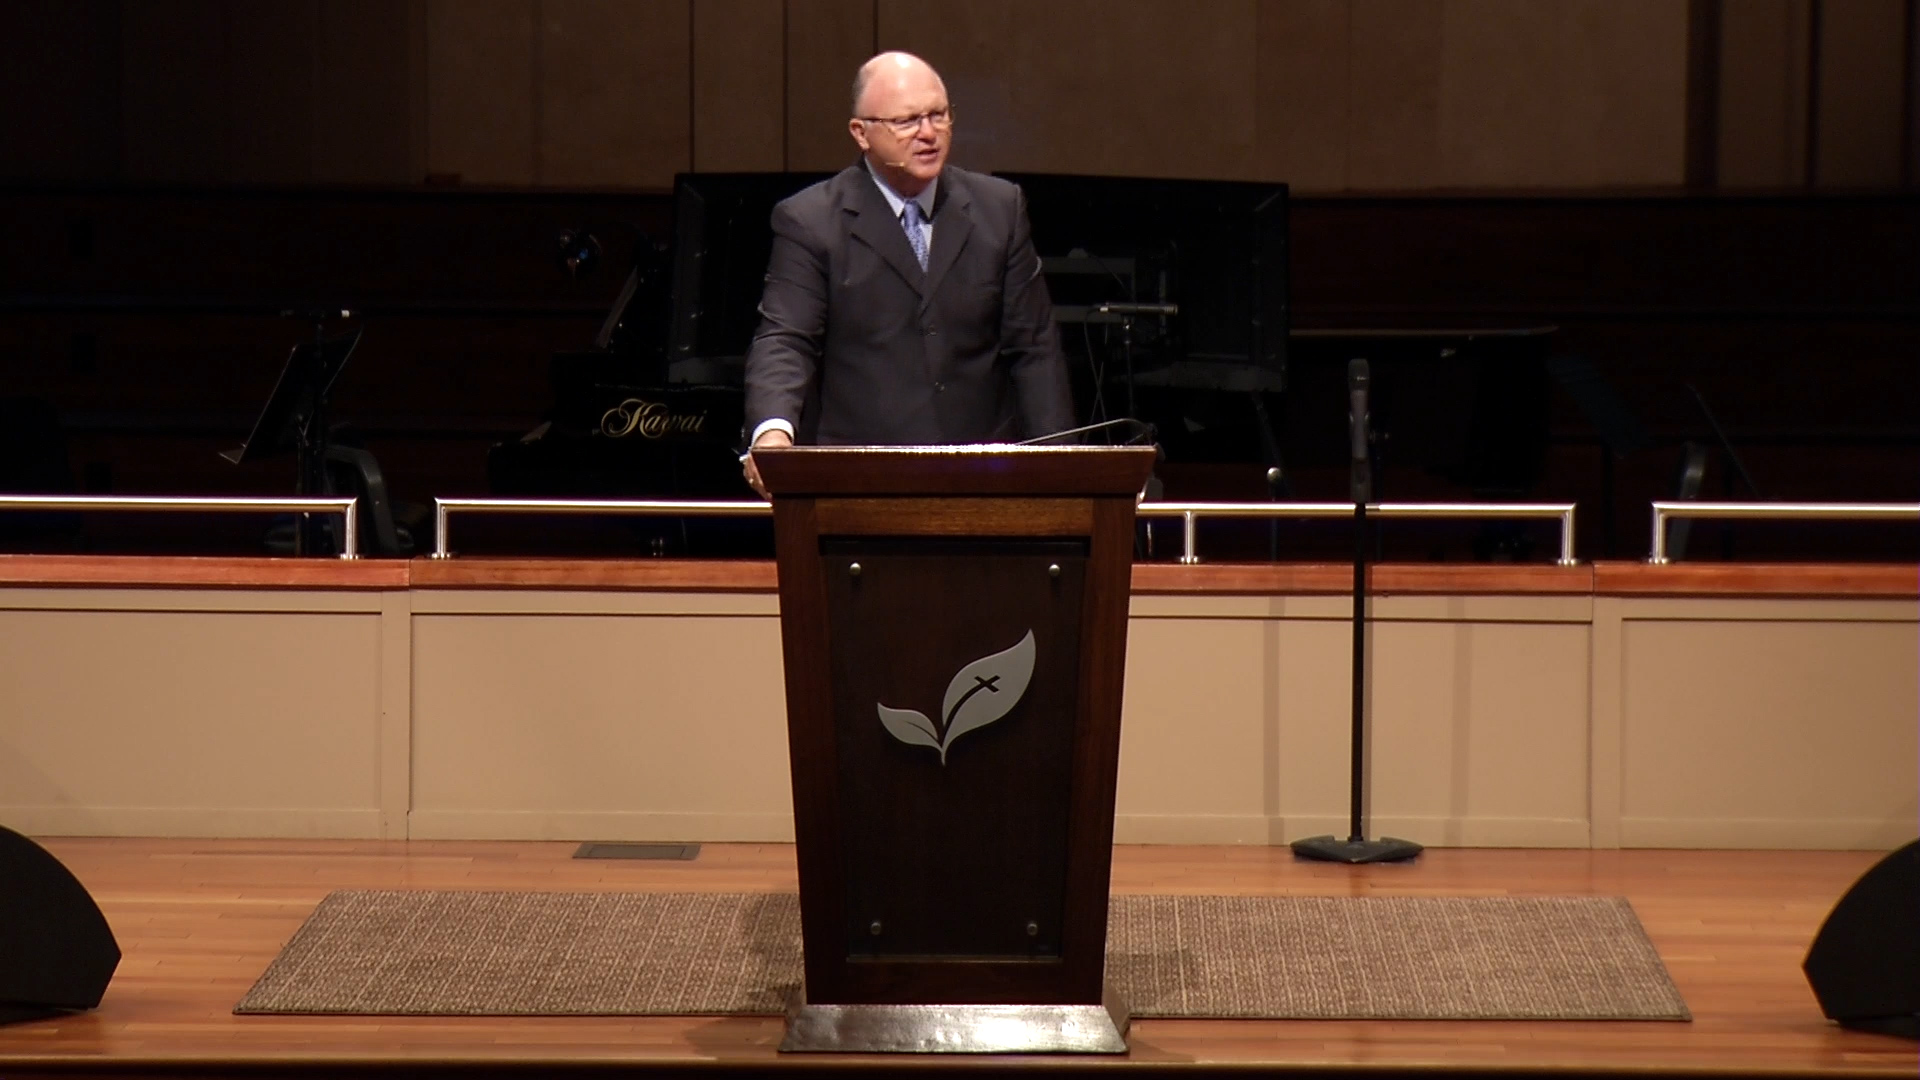 Pastor Paul Chappell: The Word is not Bound